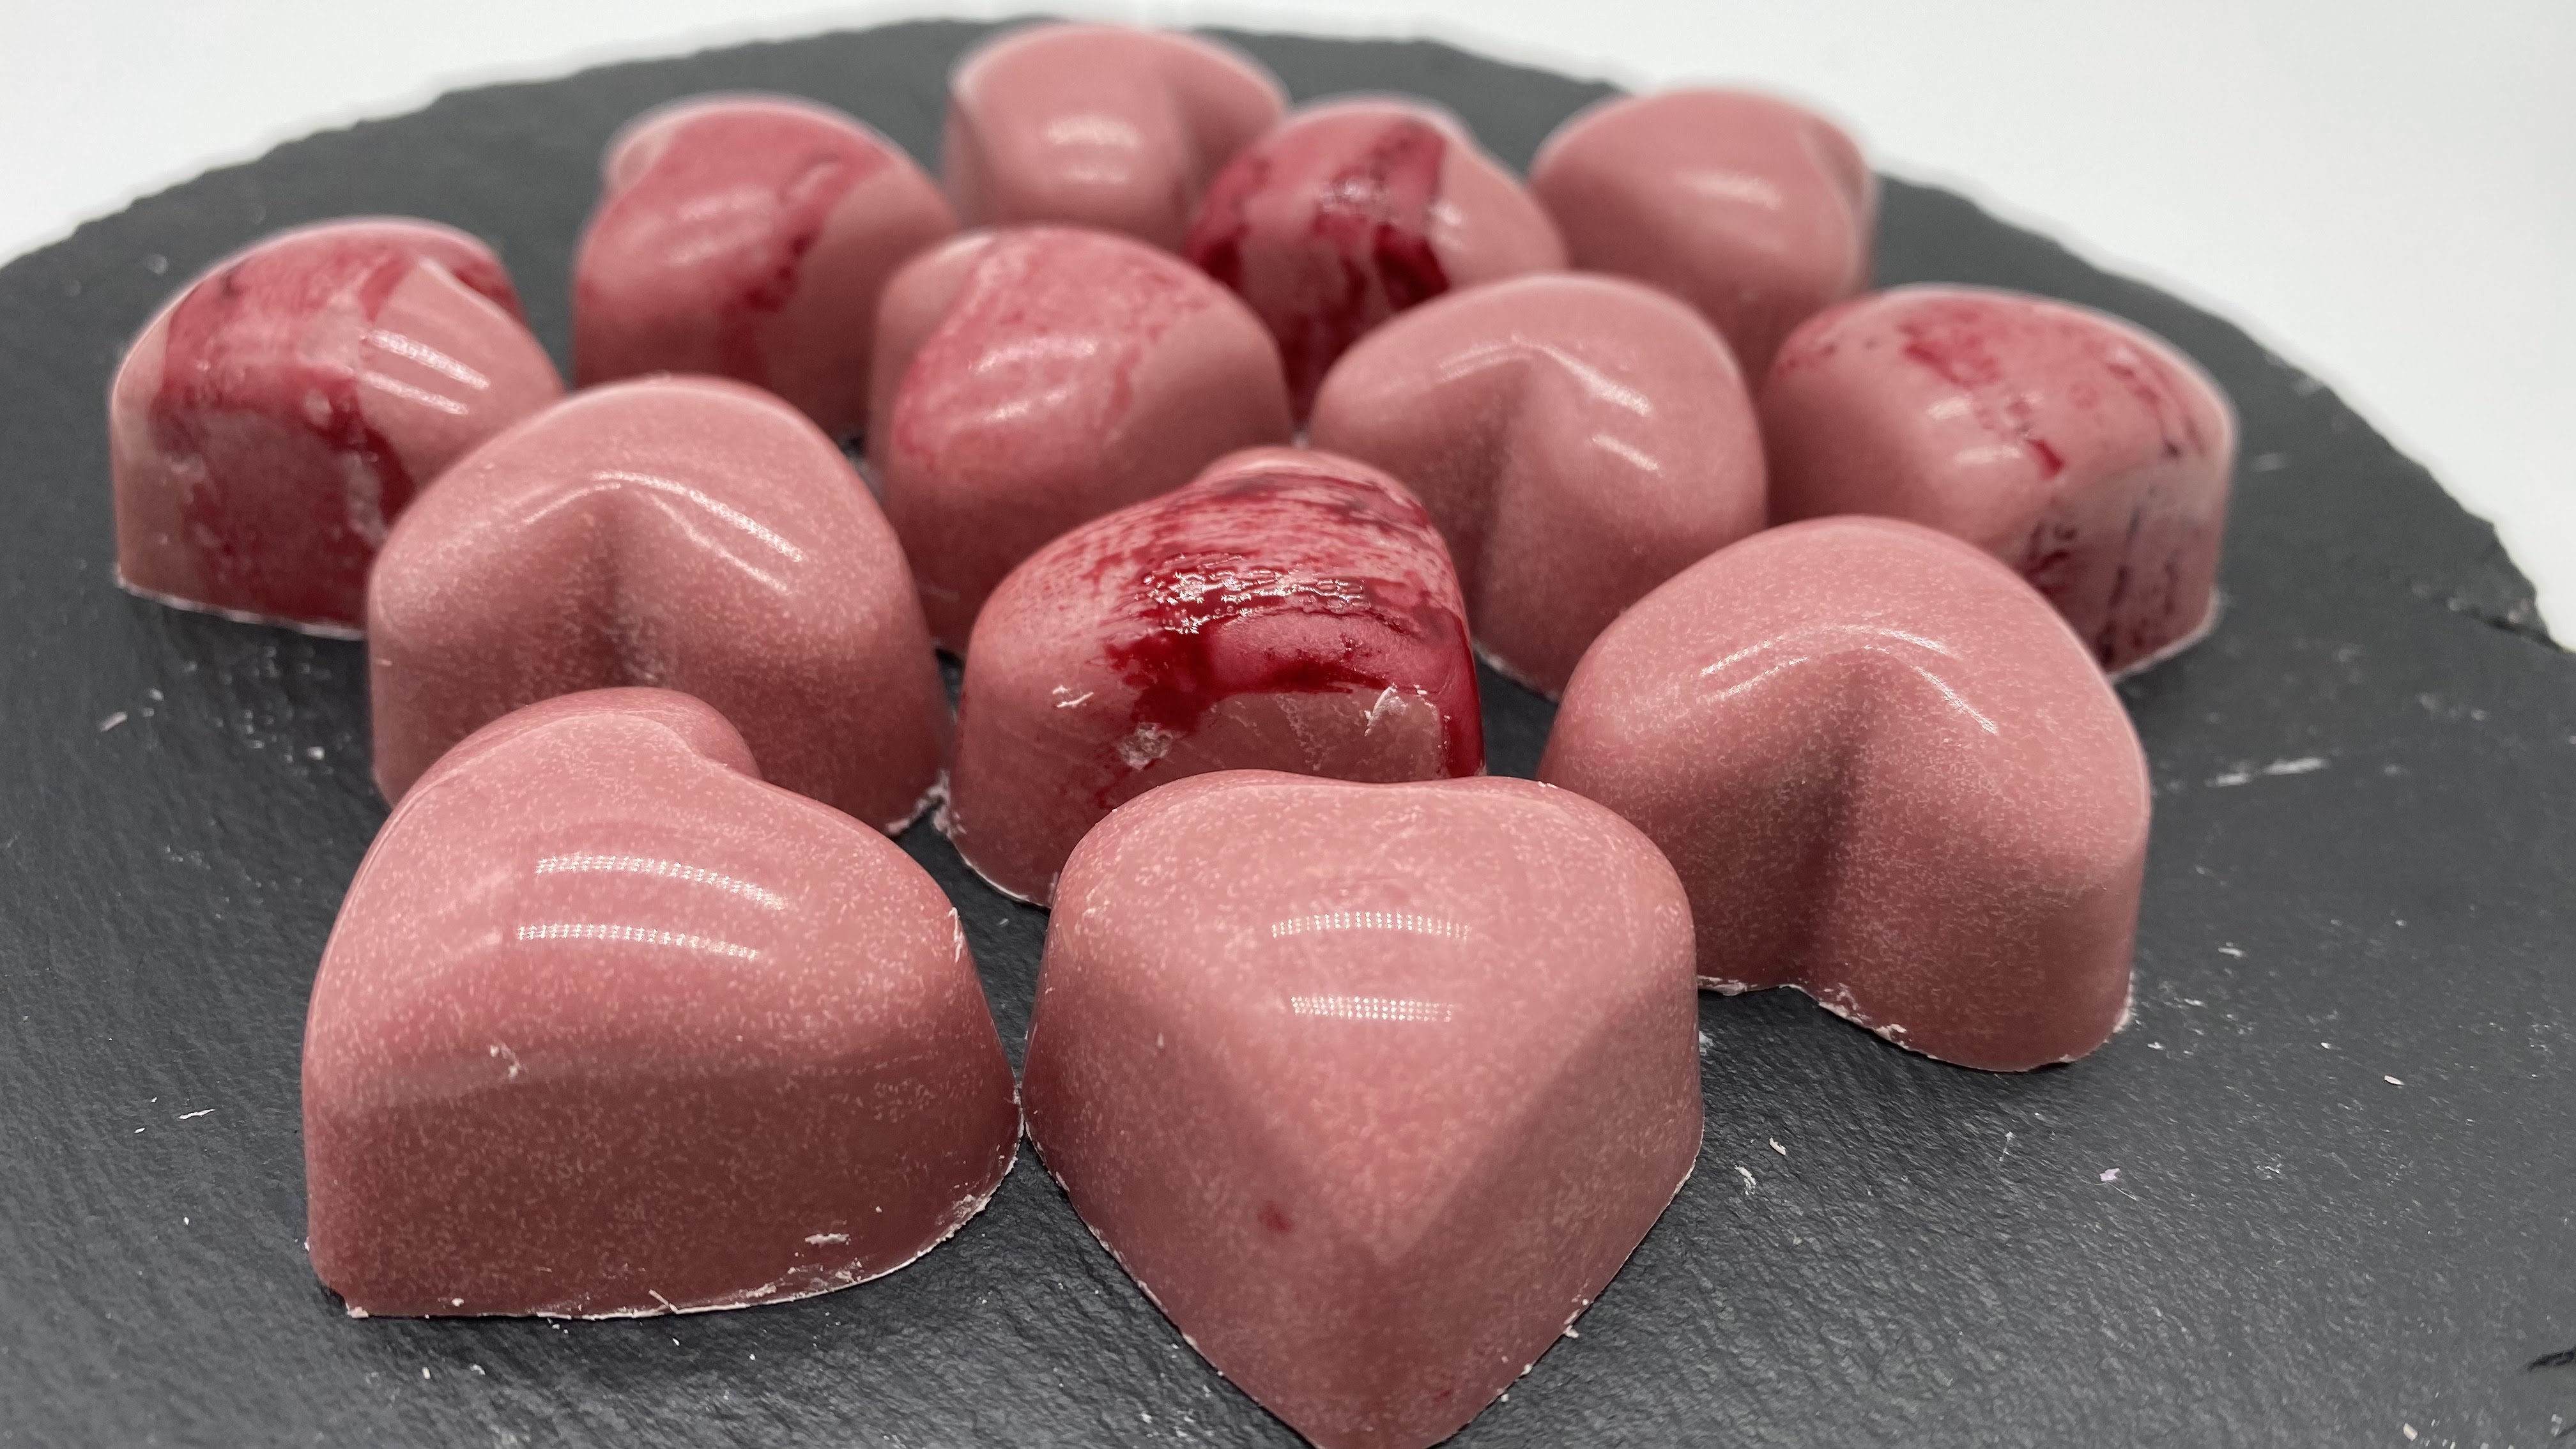 https://www.plant-ex.com/wp-content/uploads/2022/03/Watermellon-Filled-Chocolate-Hearts-4.png